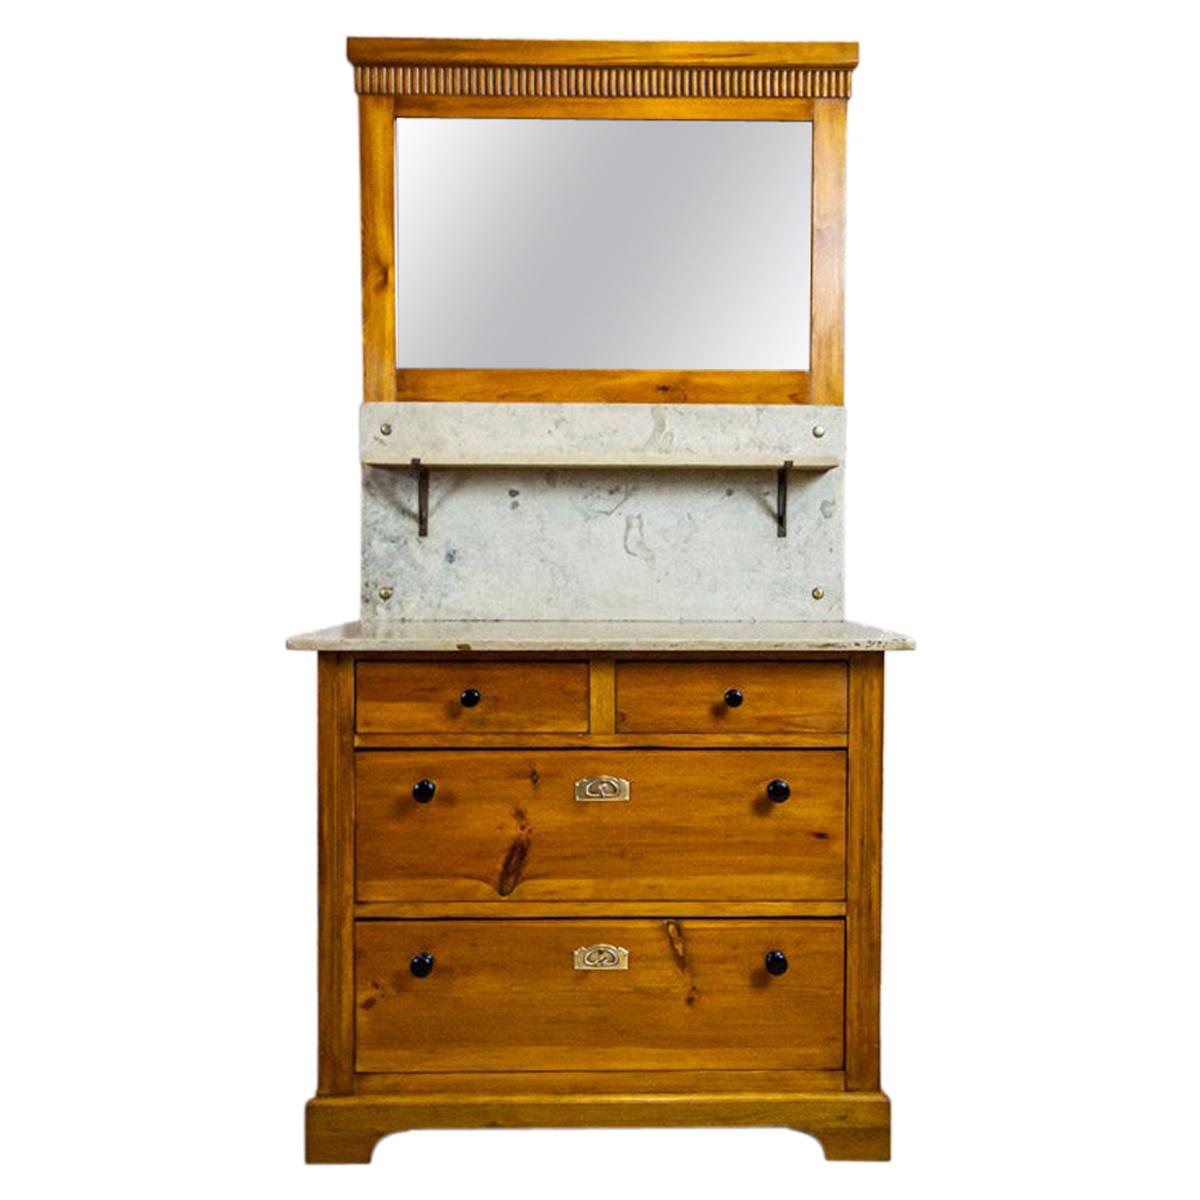 Early 20th-Century Art Nouveau Pine Commode Turned into Vanity For Sale